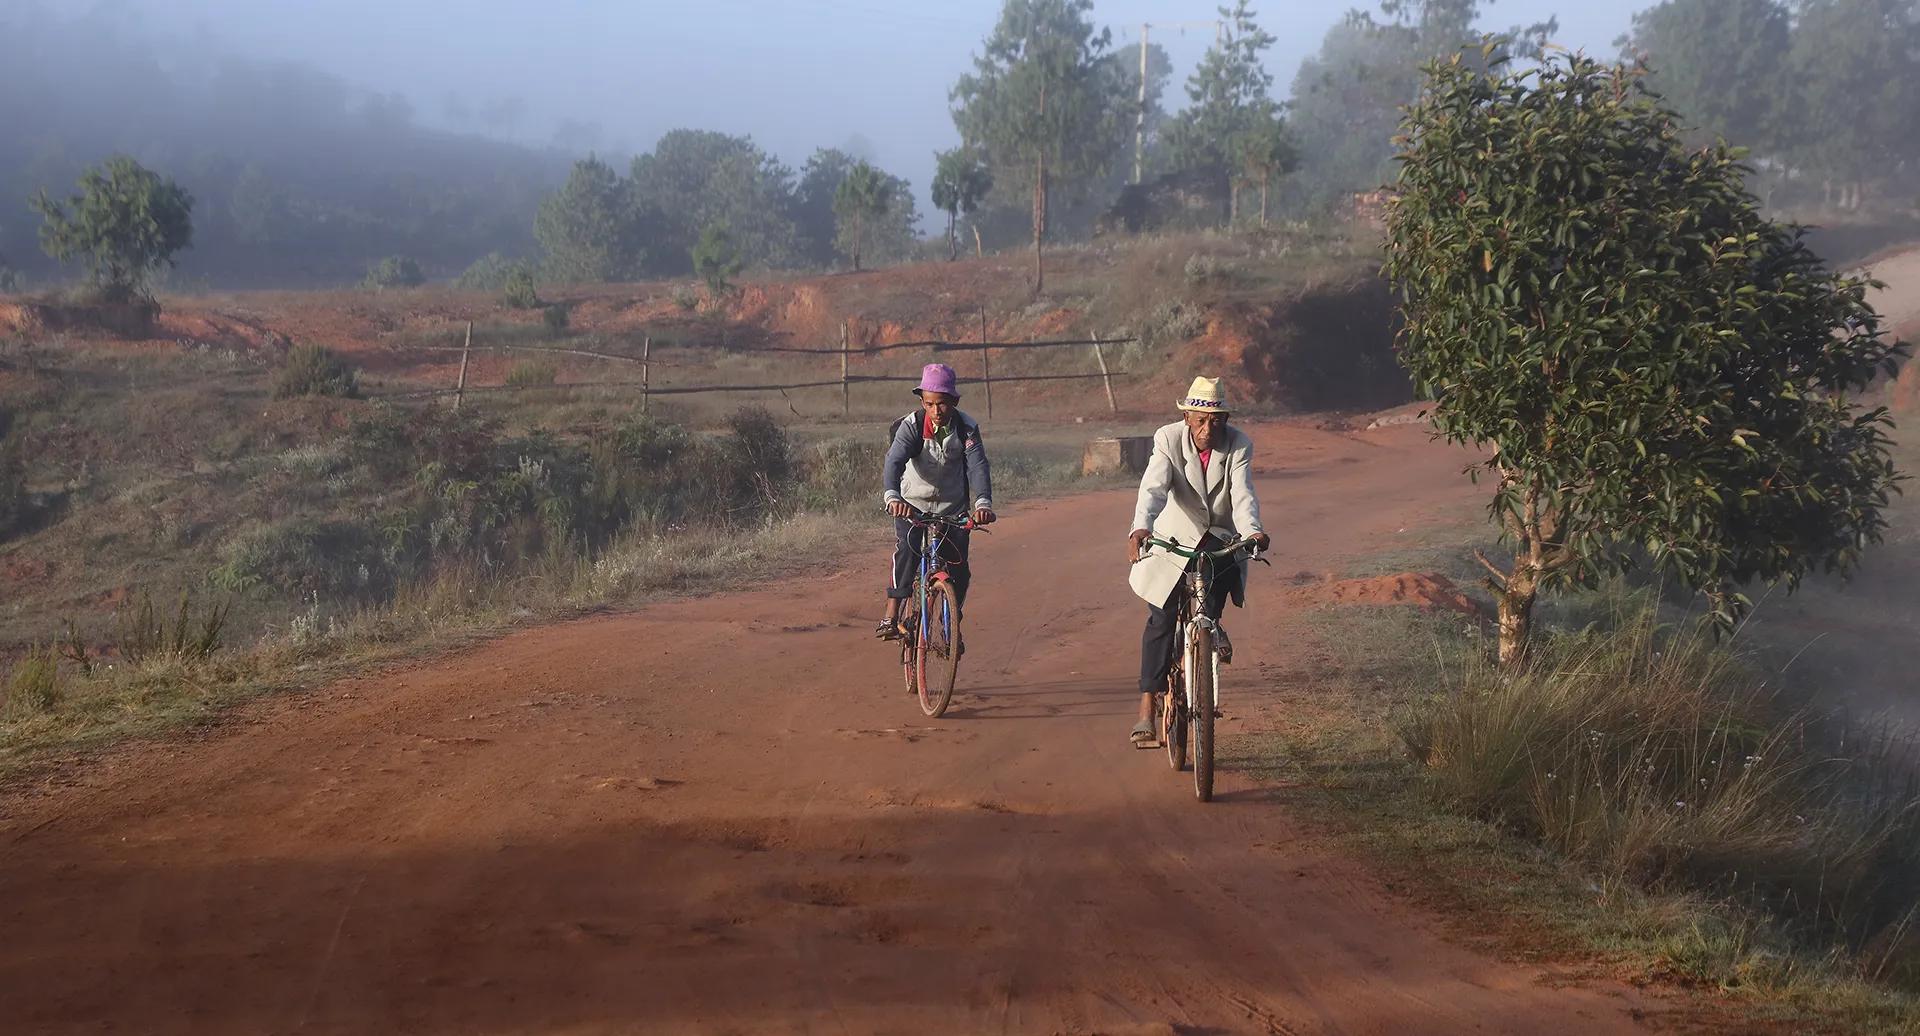 People returning from work on bicycles in nature